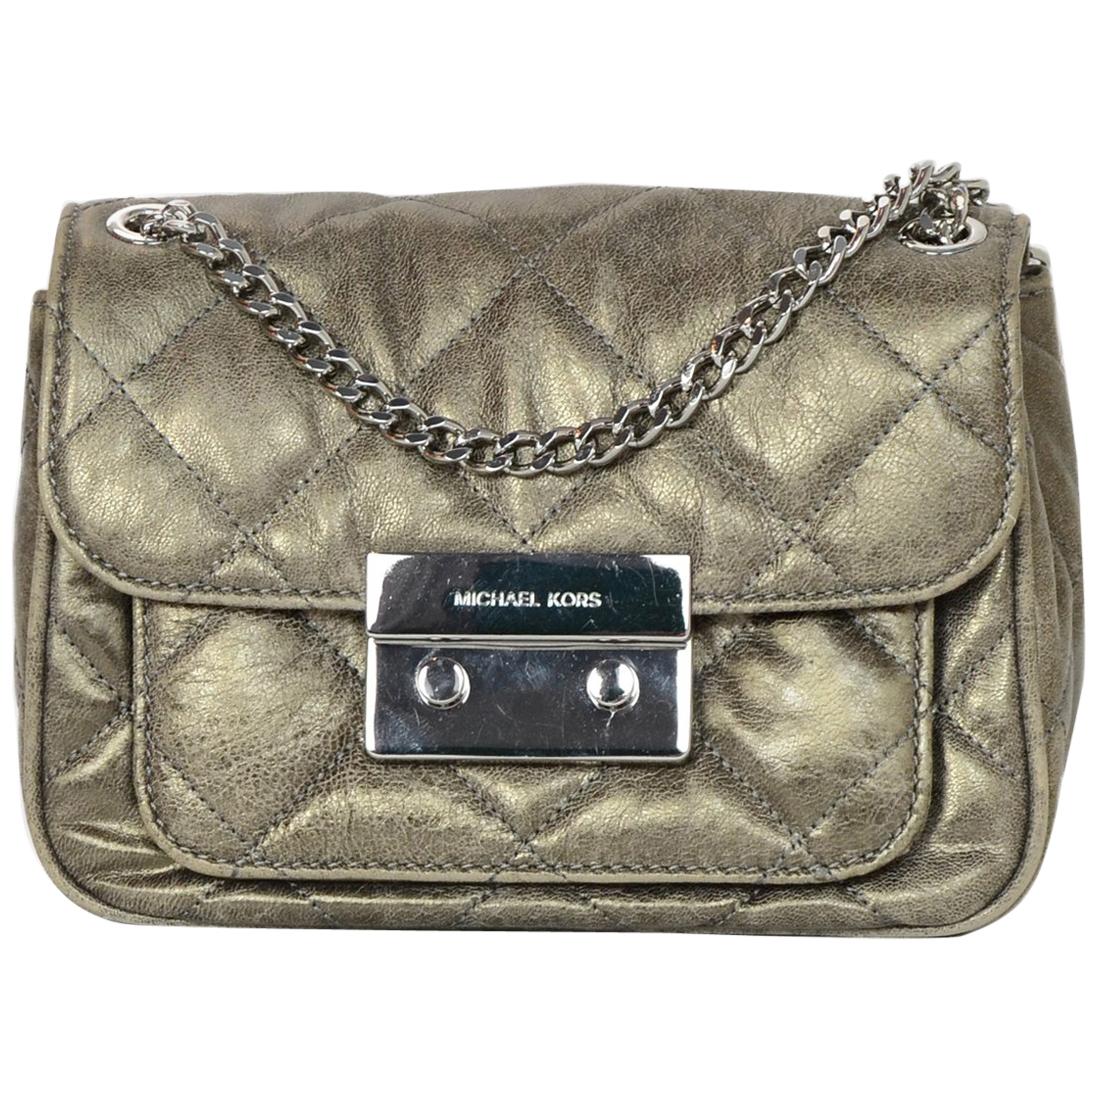 Michael Kors Sueded Leather Distressed Metallic Quilted Sloan Flap Crossbody Bag